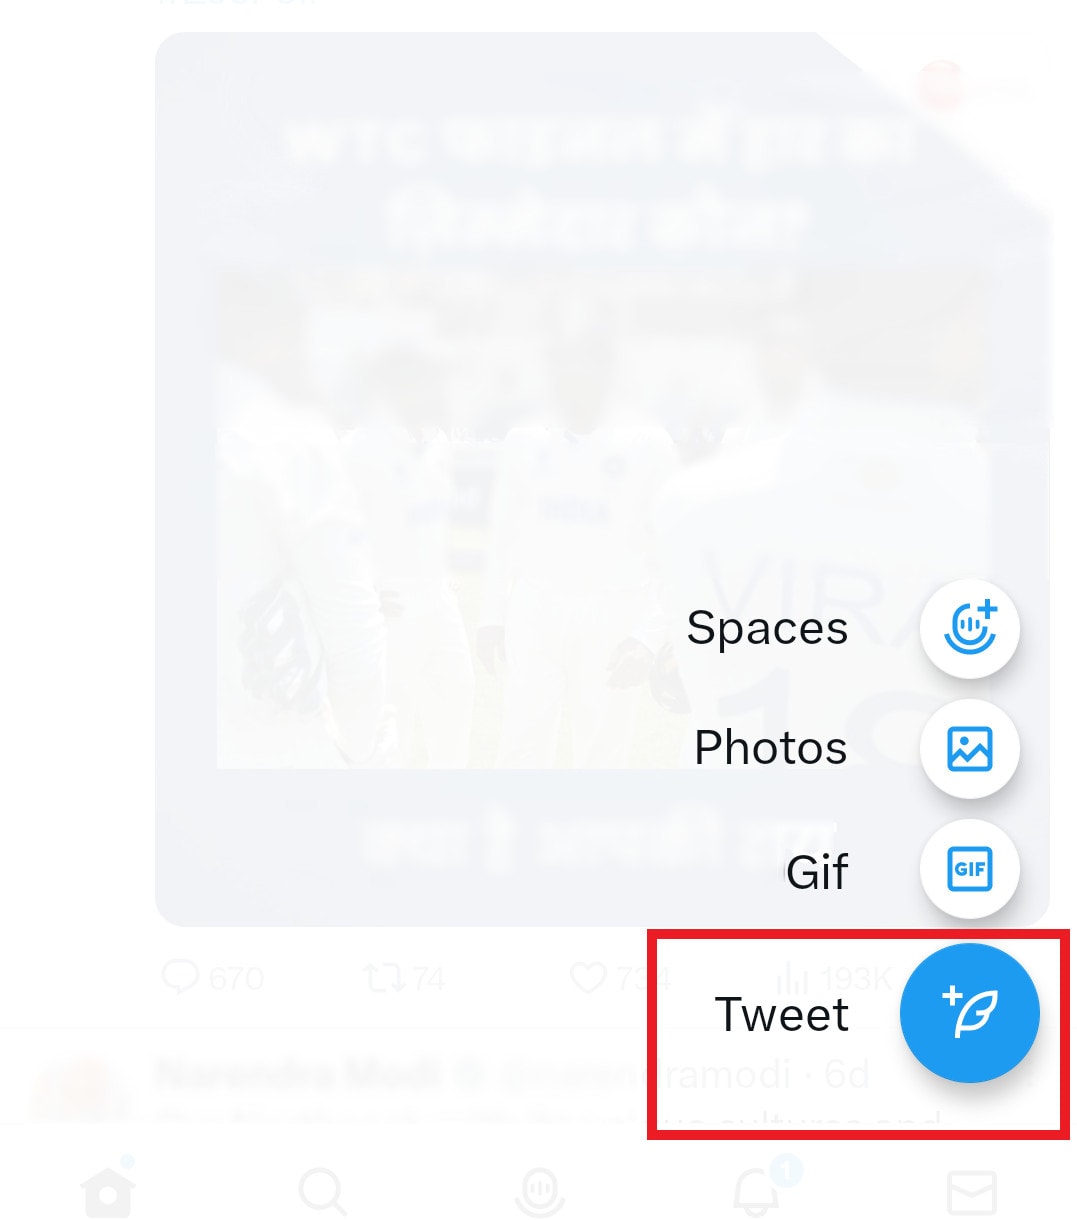 Tap on the + icon and choose Tweet from the options on your screen